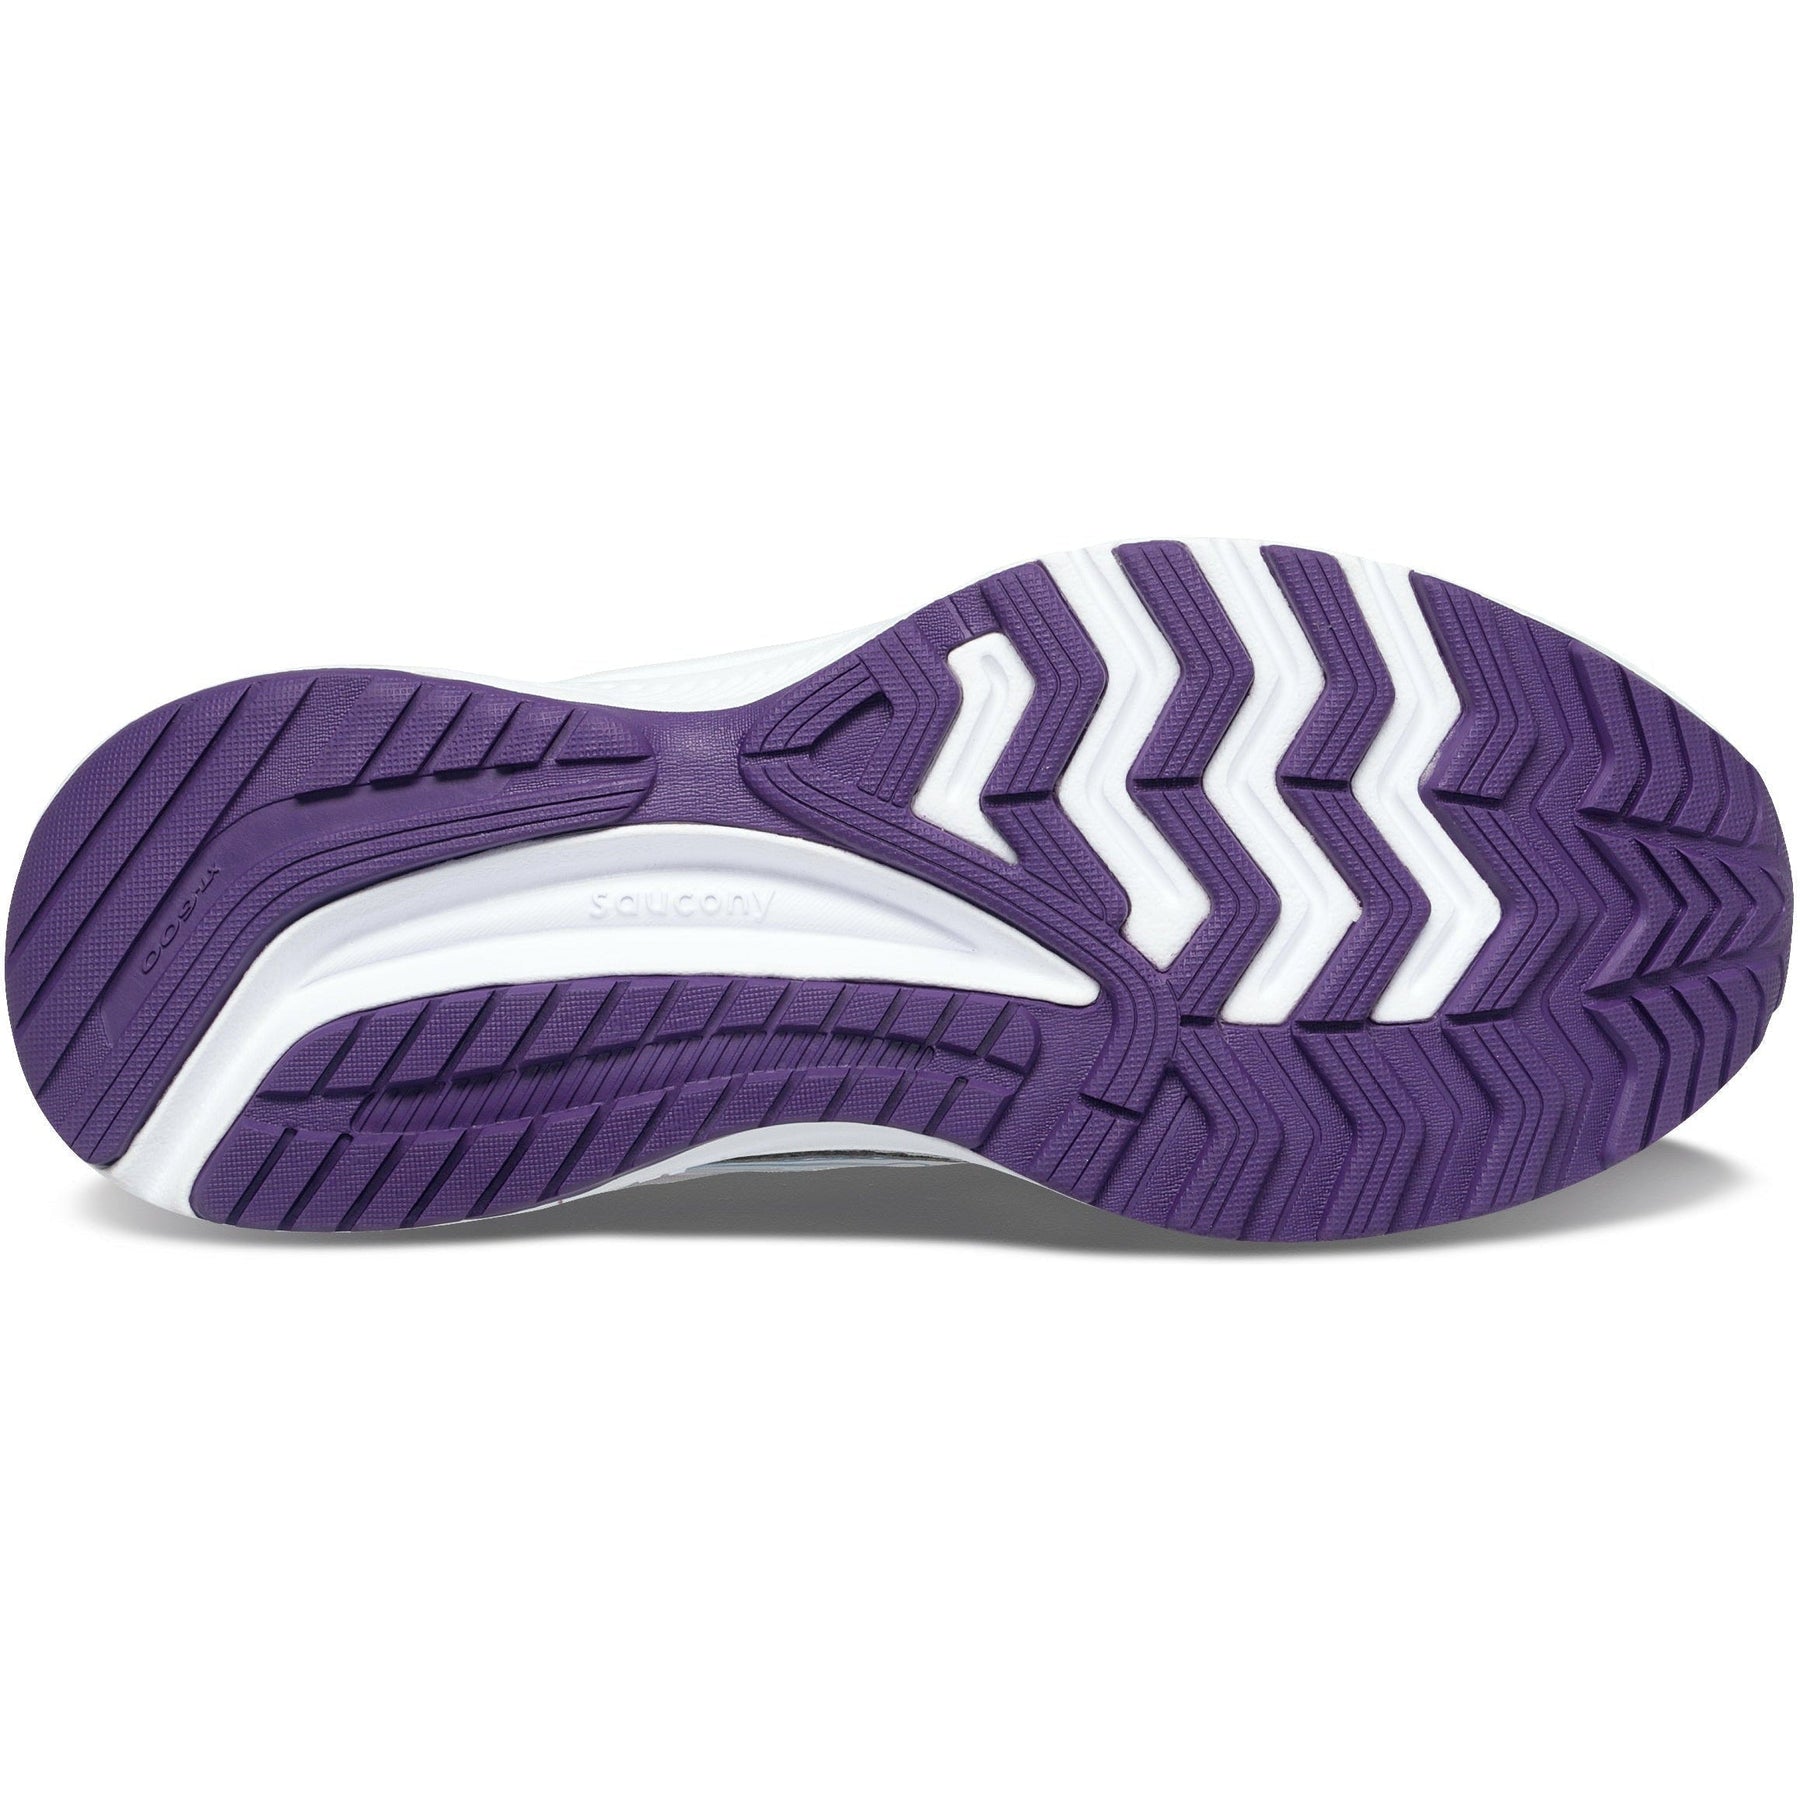 Saucony-Women's Saucony Cohesion 15-Pacers Running